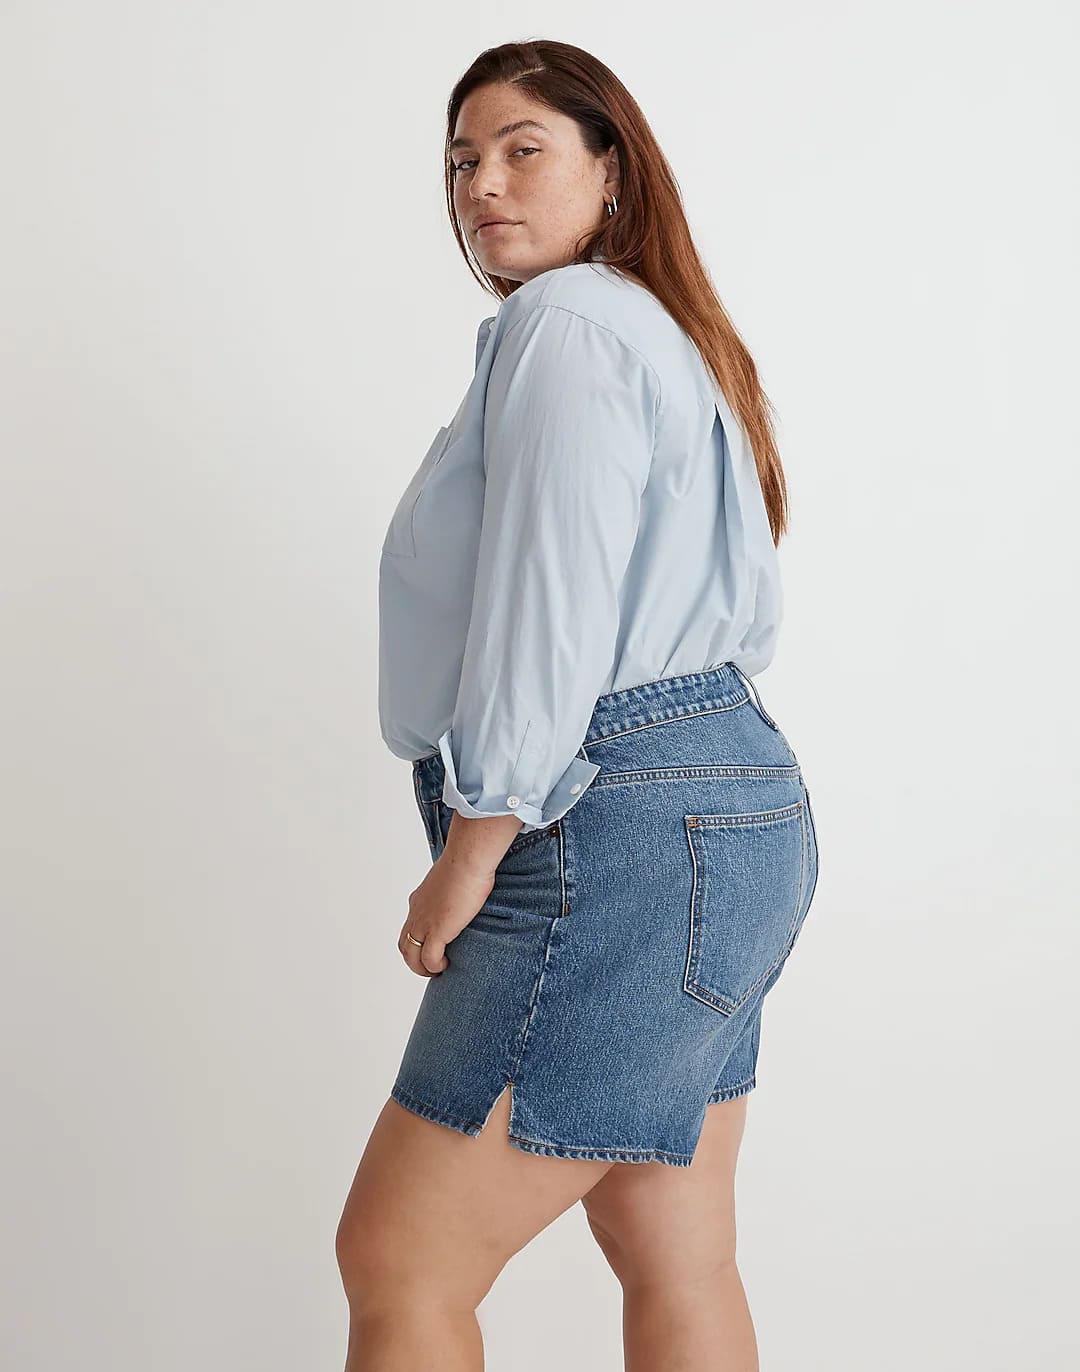 Plus Relaxed fit denim shirt from madewell